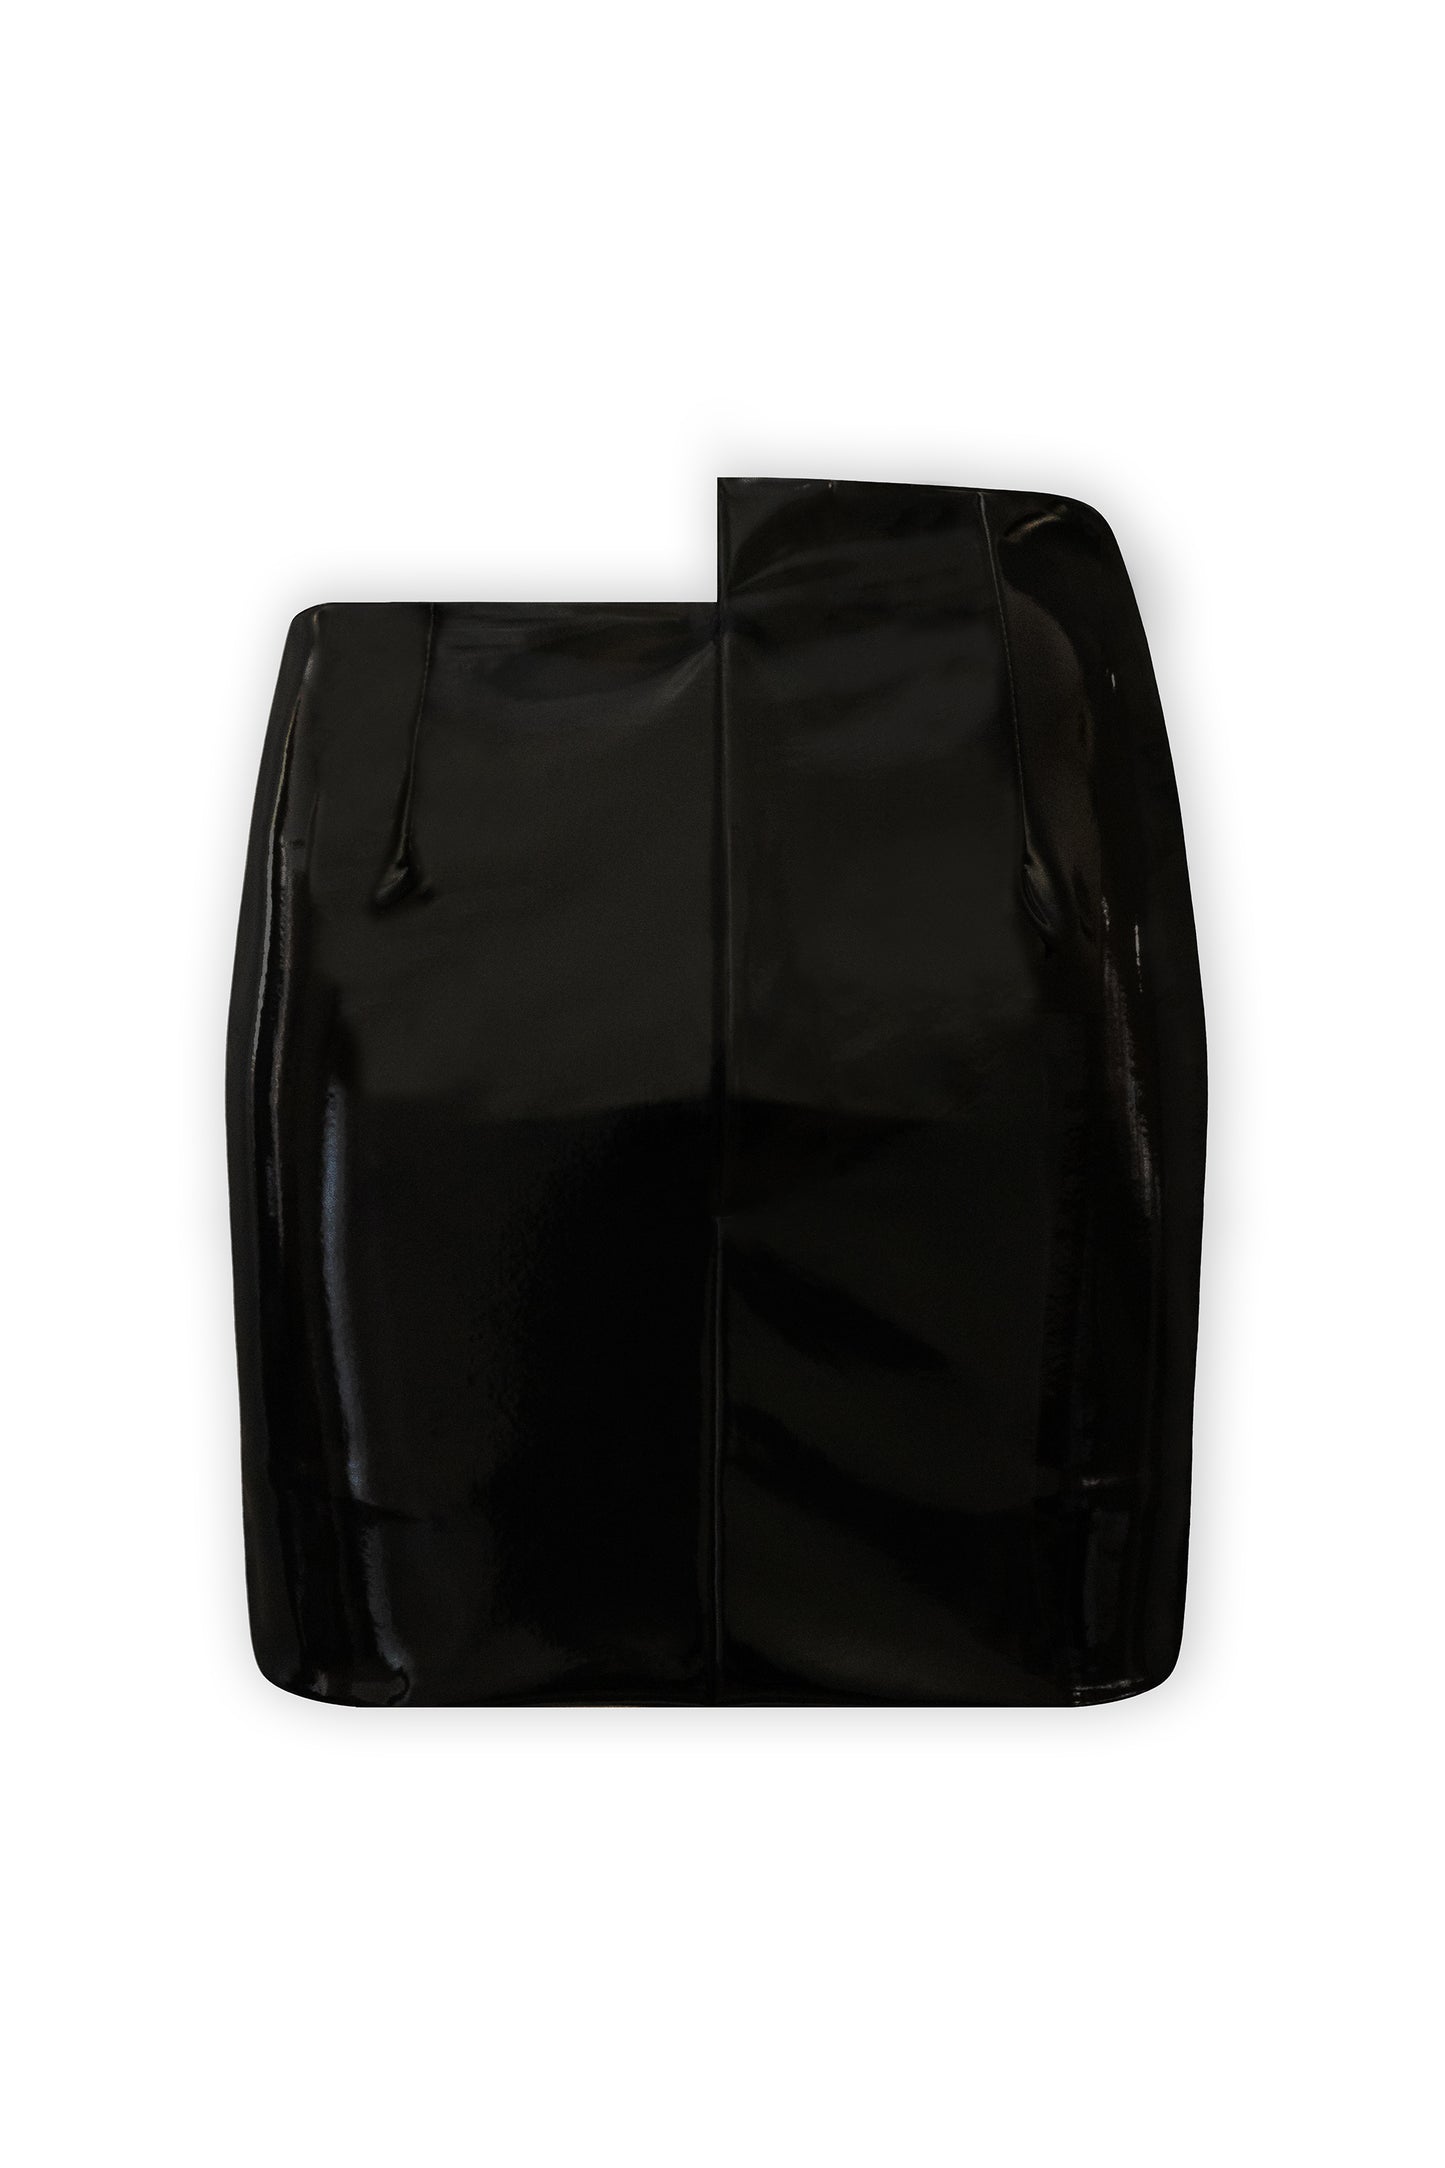 A black mini skirt with stepping on the waist, made from 100% eco leather and closed with soft lining. The skirt photograph is from the back on a white background.